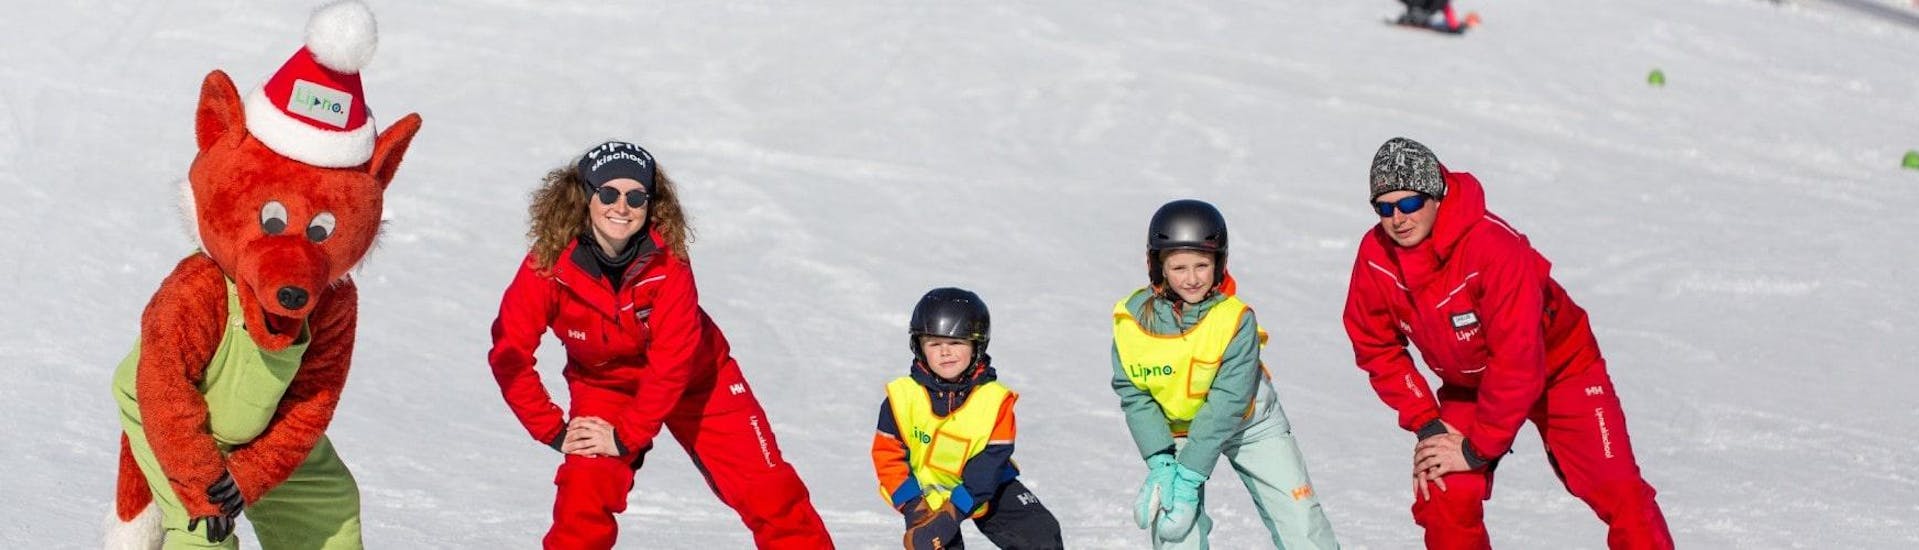 Ski Lessons for Kids (4-5 years) - Group Lesson.